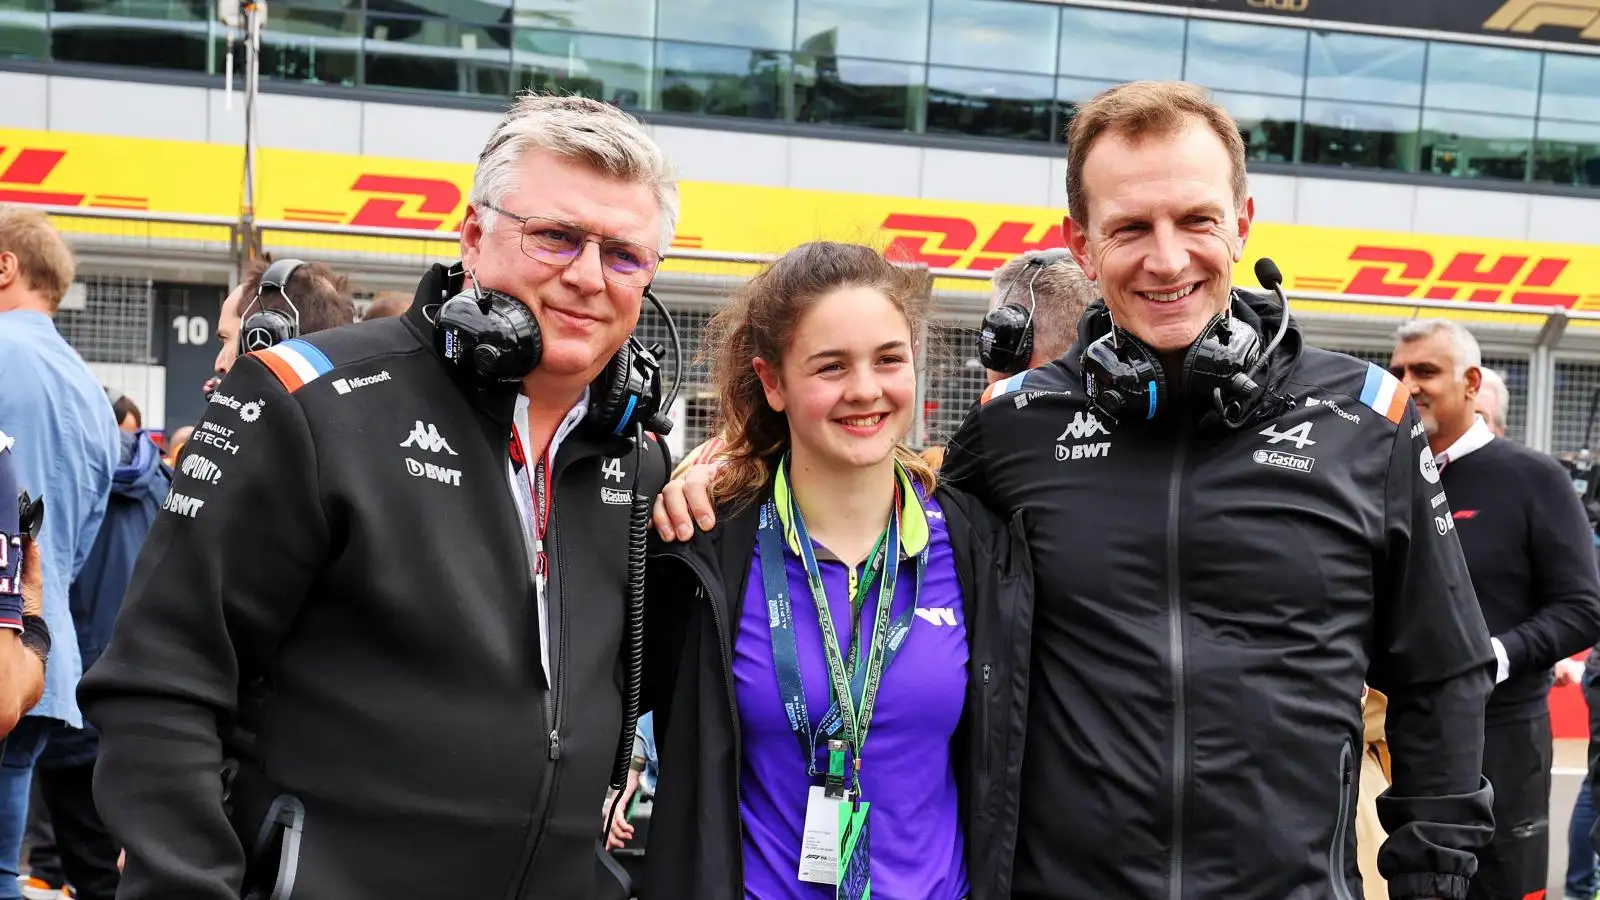 Otmar Szafnauer with Abbi Pulling and Laurent Rossi. Silverstone, July 2022.